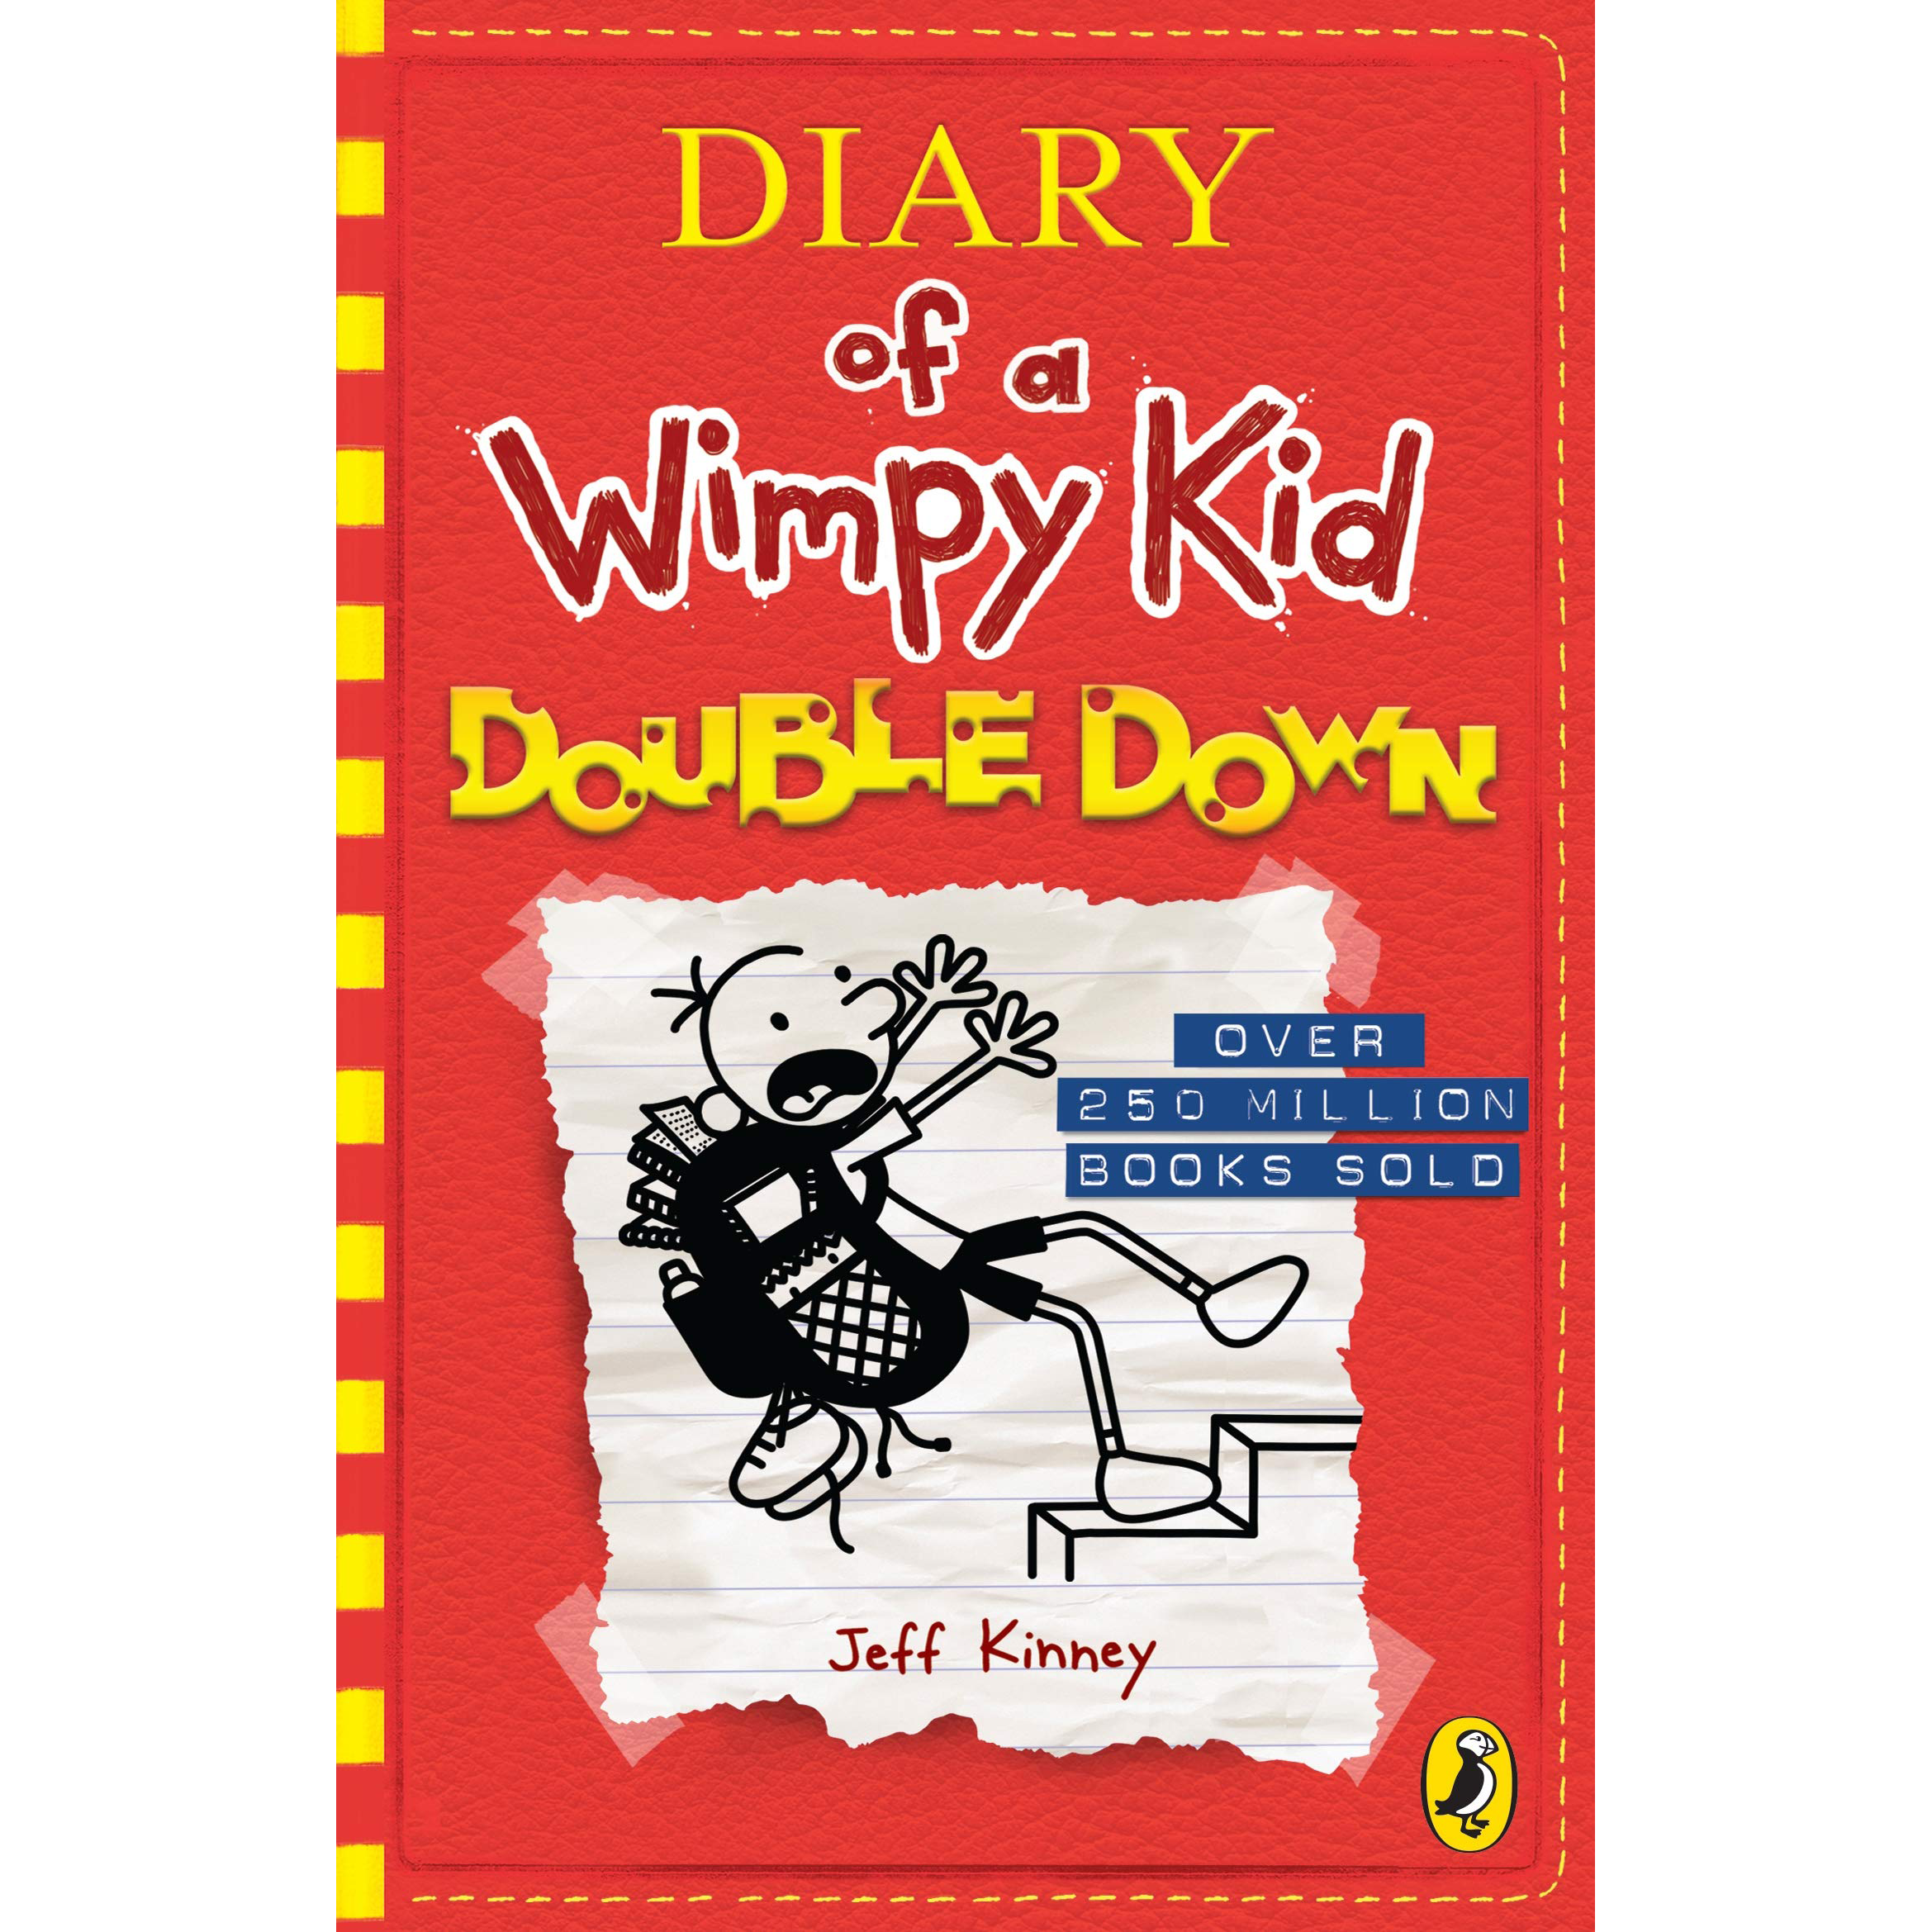 Diary Of A Wimpy Kid — The Margate Bookshop